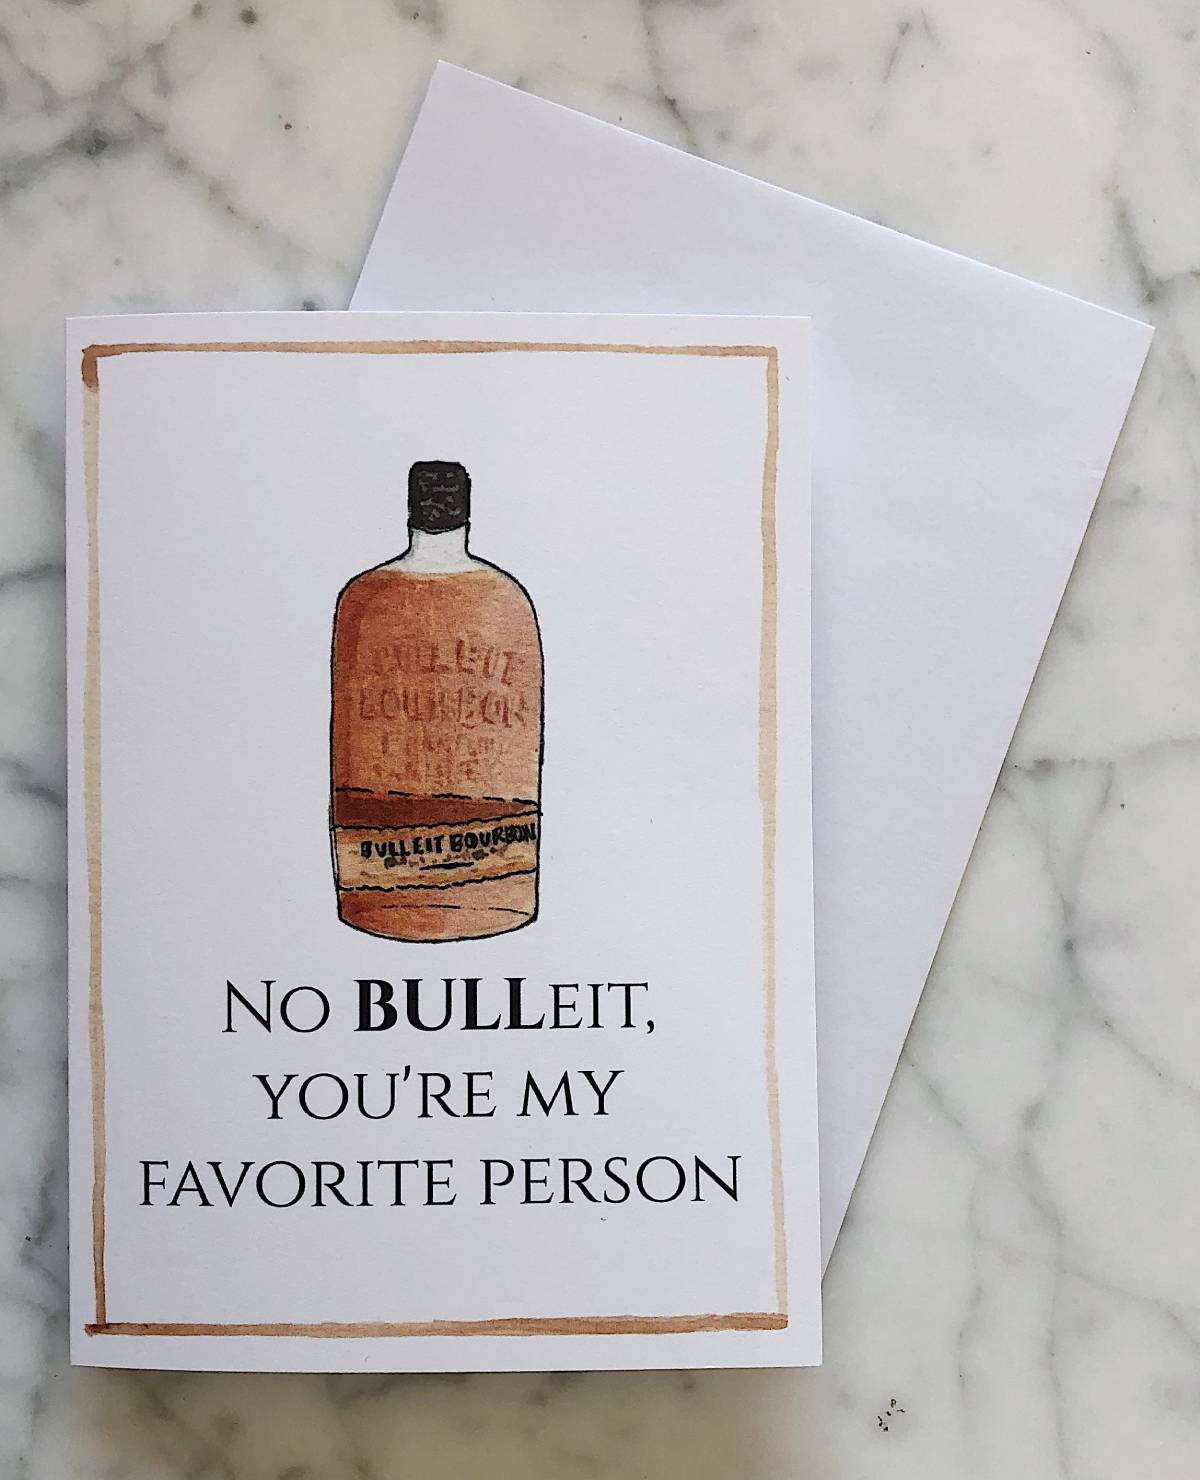 A bourbon Valentine's Day card showing a bottle of Bulleit with the phrase "No bulleit, you're my favorite person"